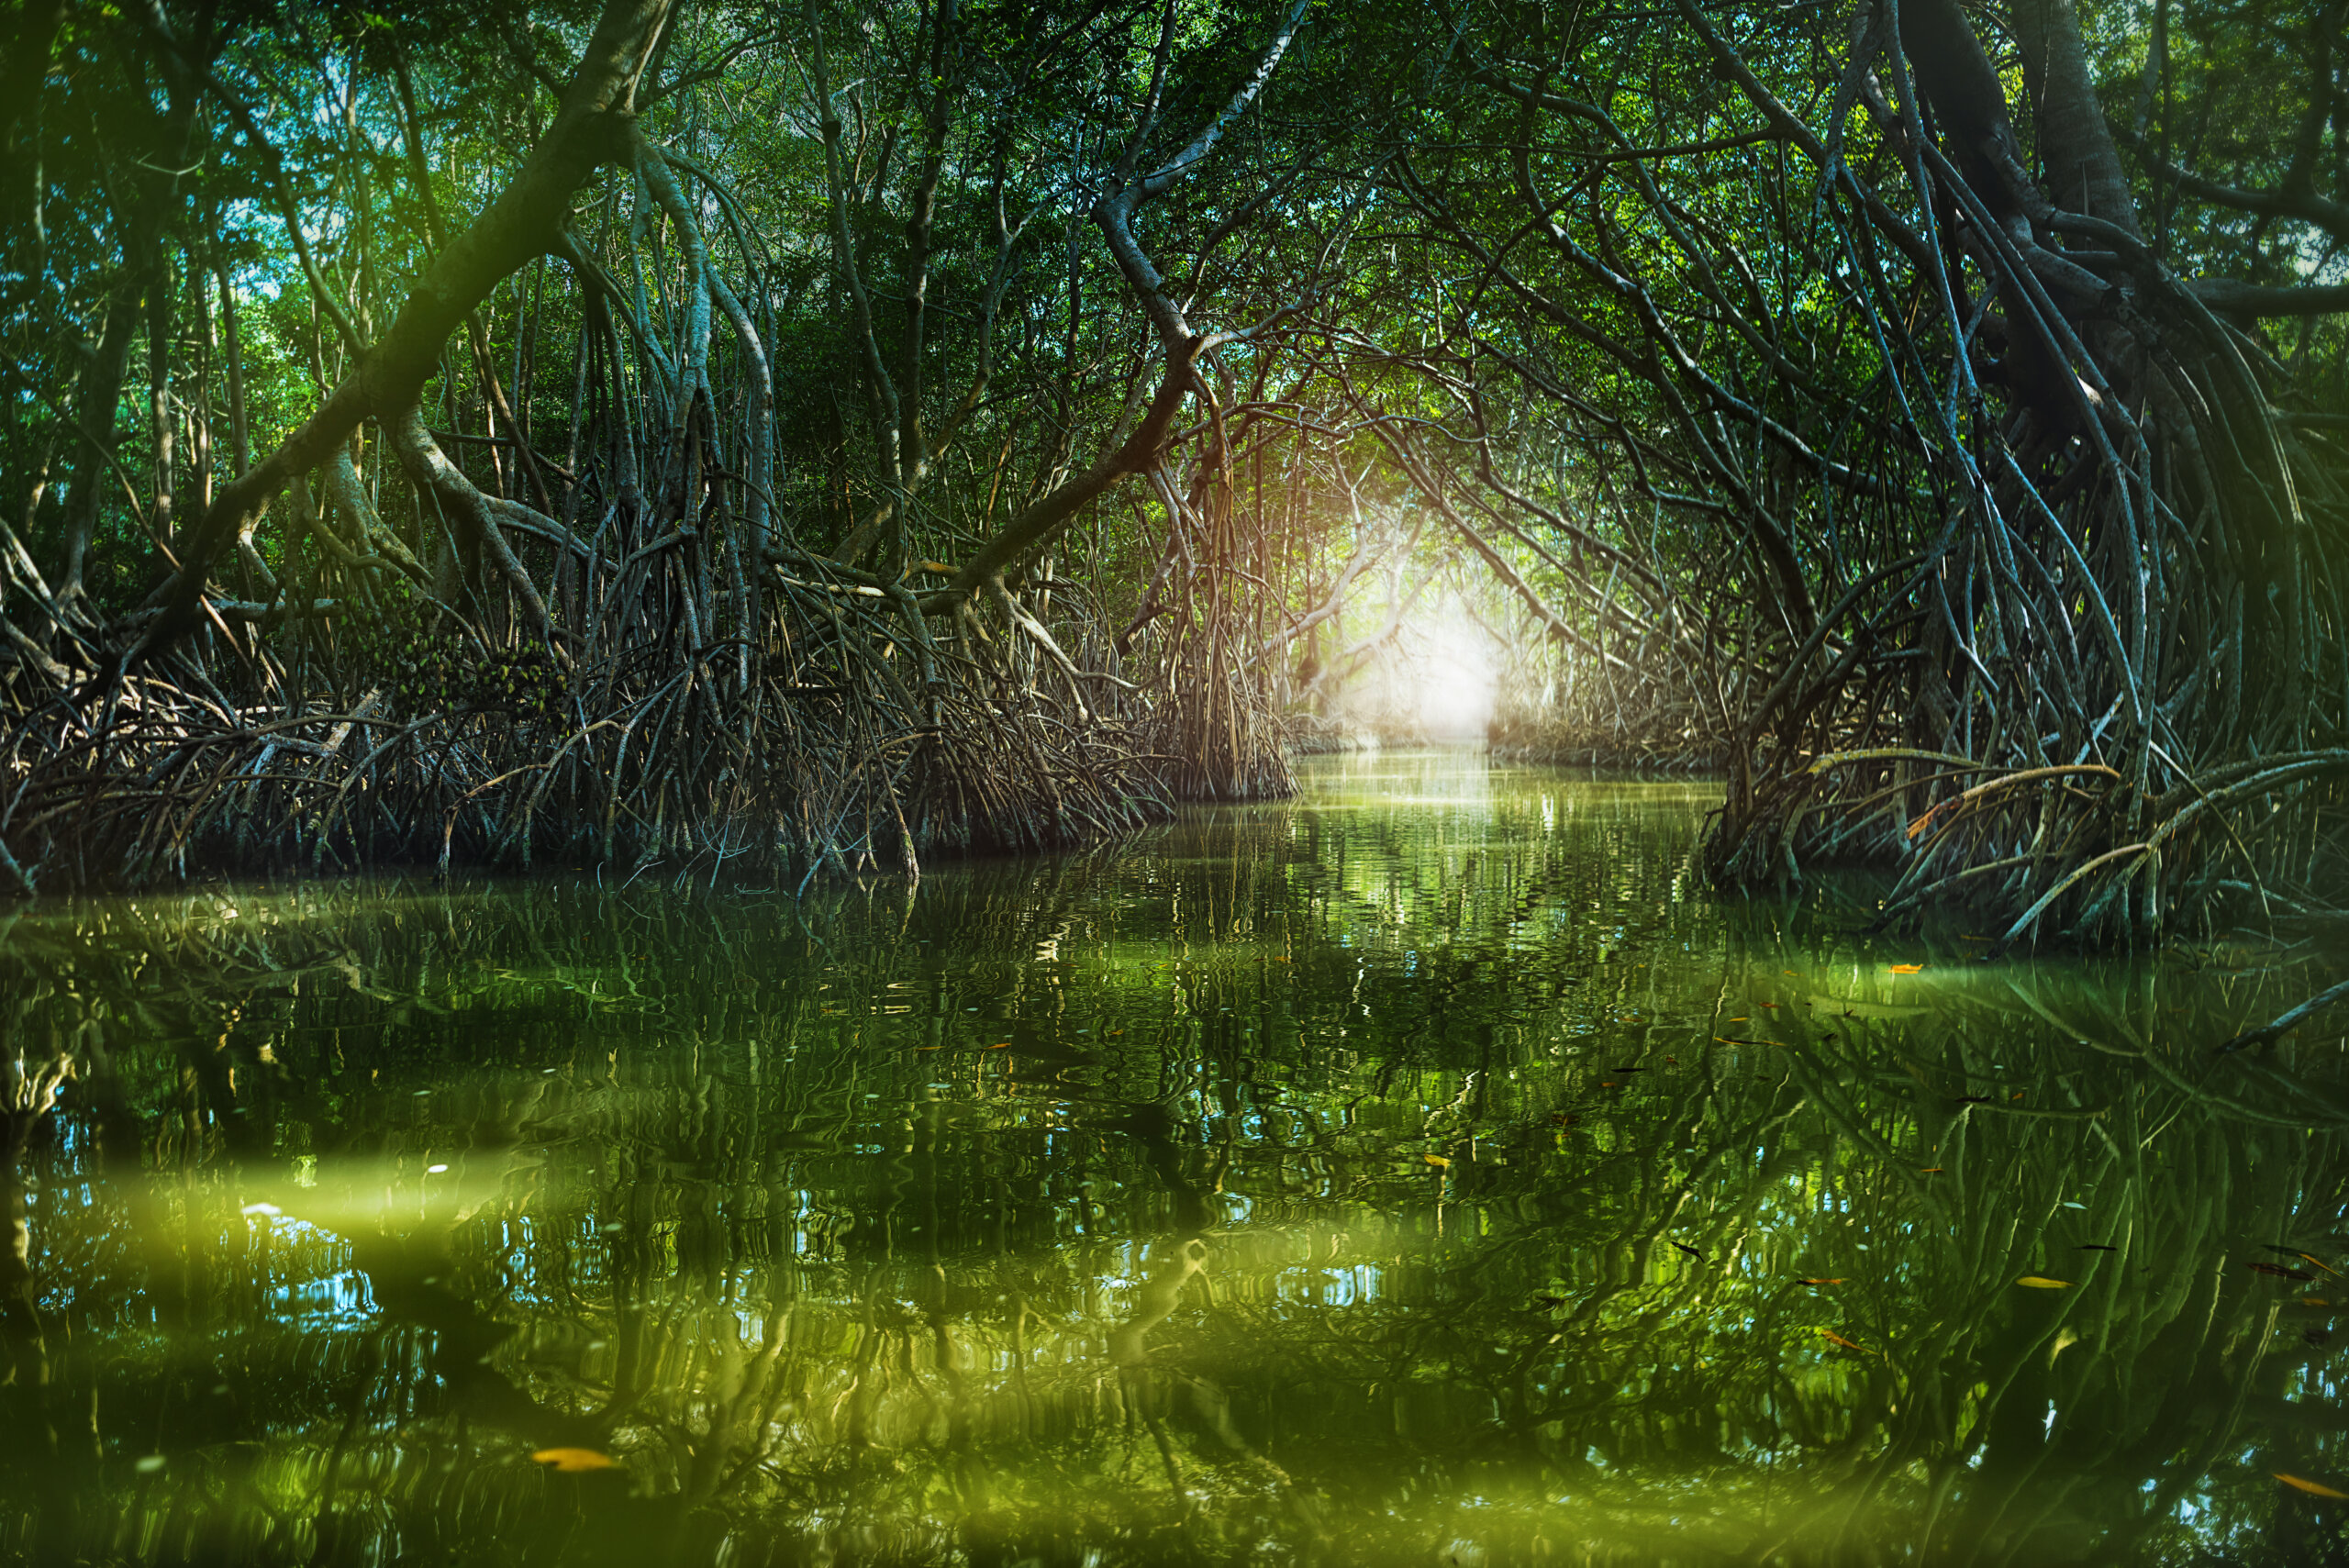 Mangrove forest by the Ria Celestun lake in Mexico